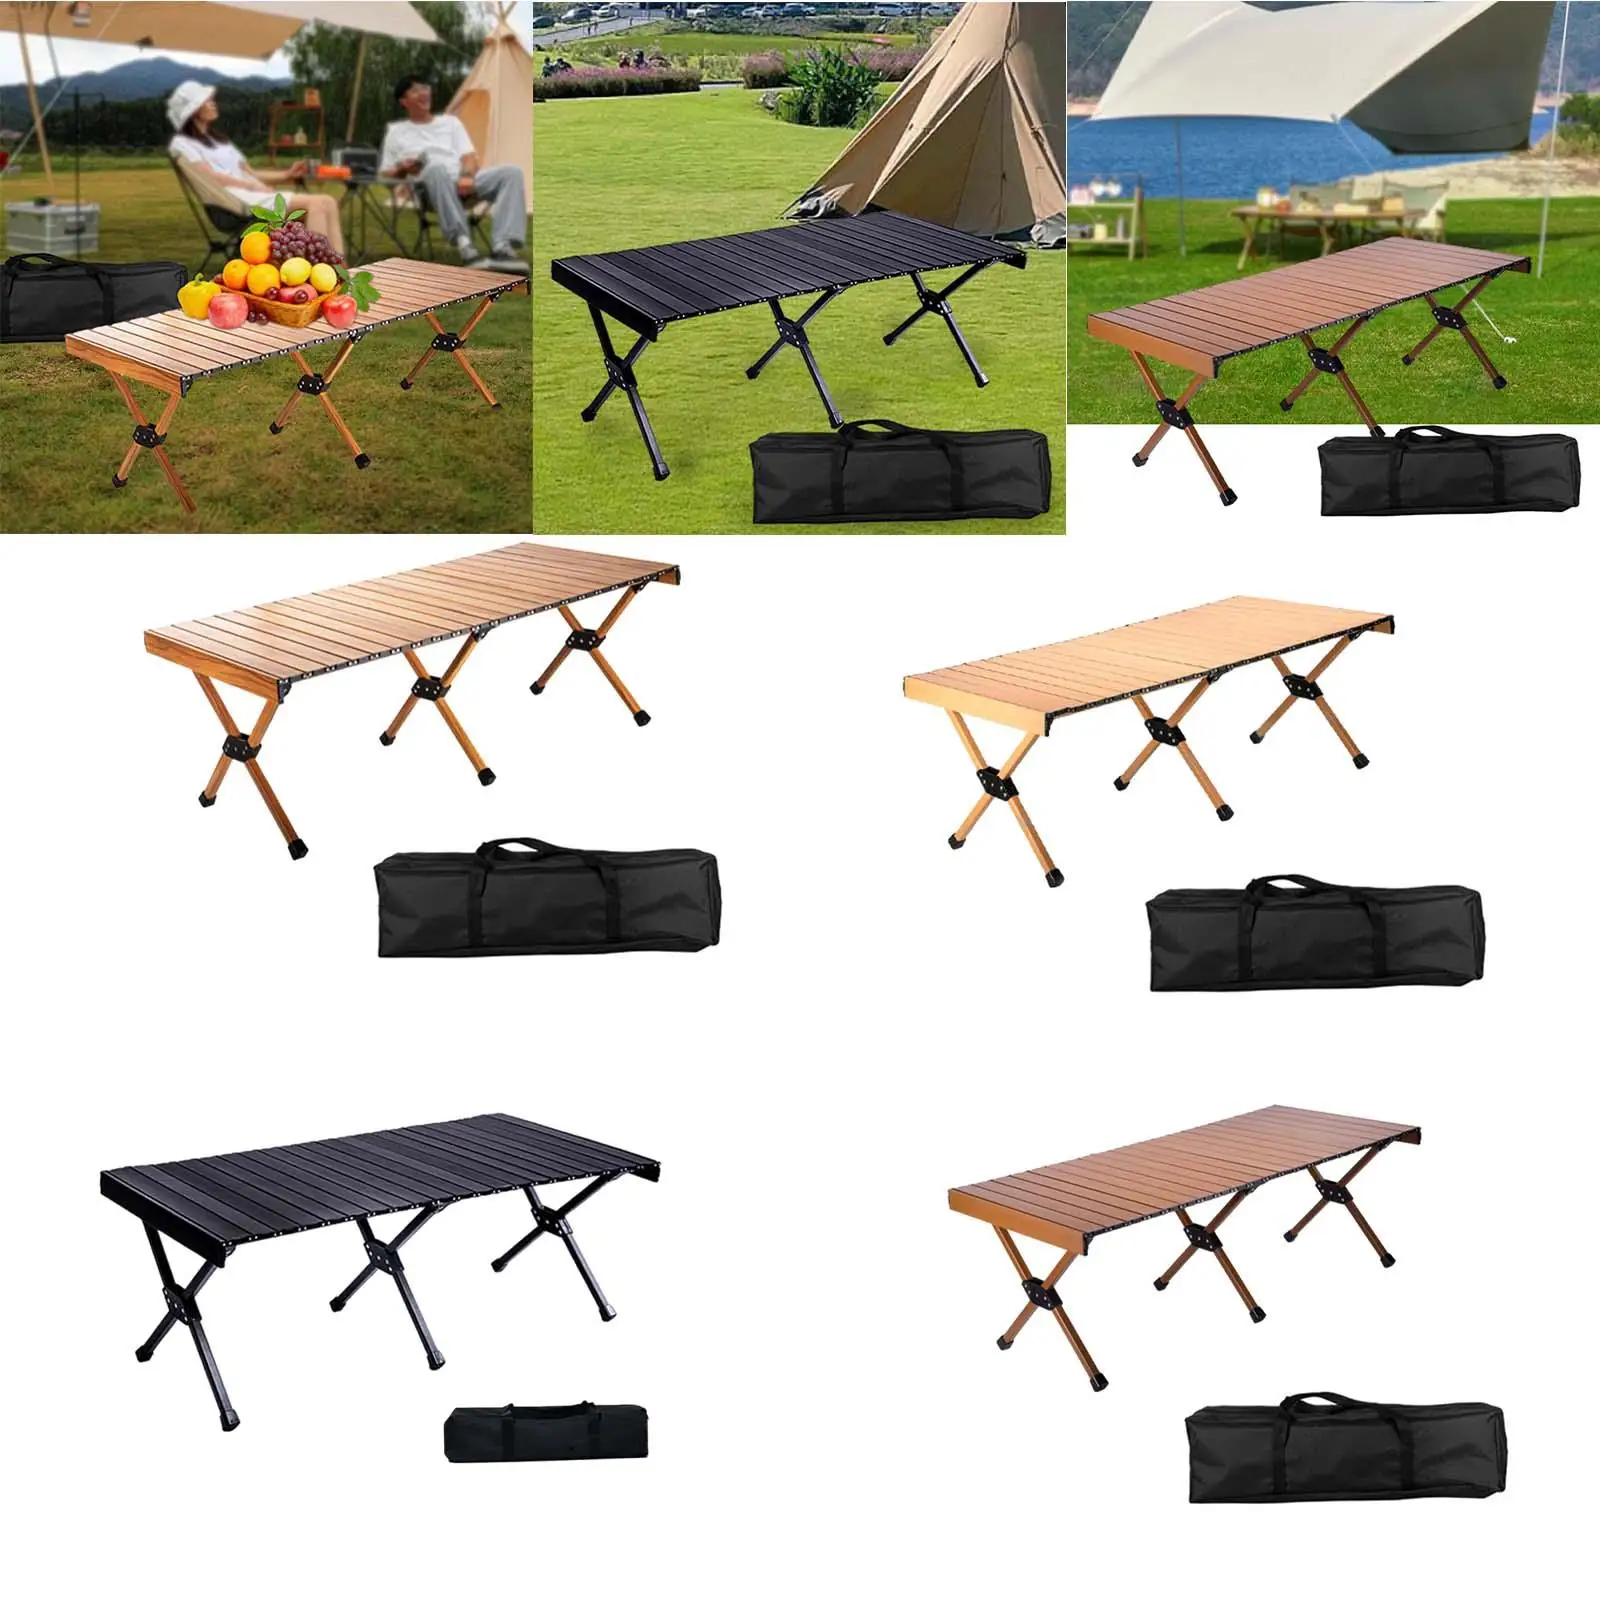 Camping Folding Table Furniture Aluminum Table Portable with Carry Bag Picnic Table for Outdoor Indoor Beach Balcony Deck Picnic